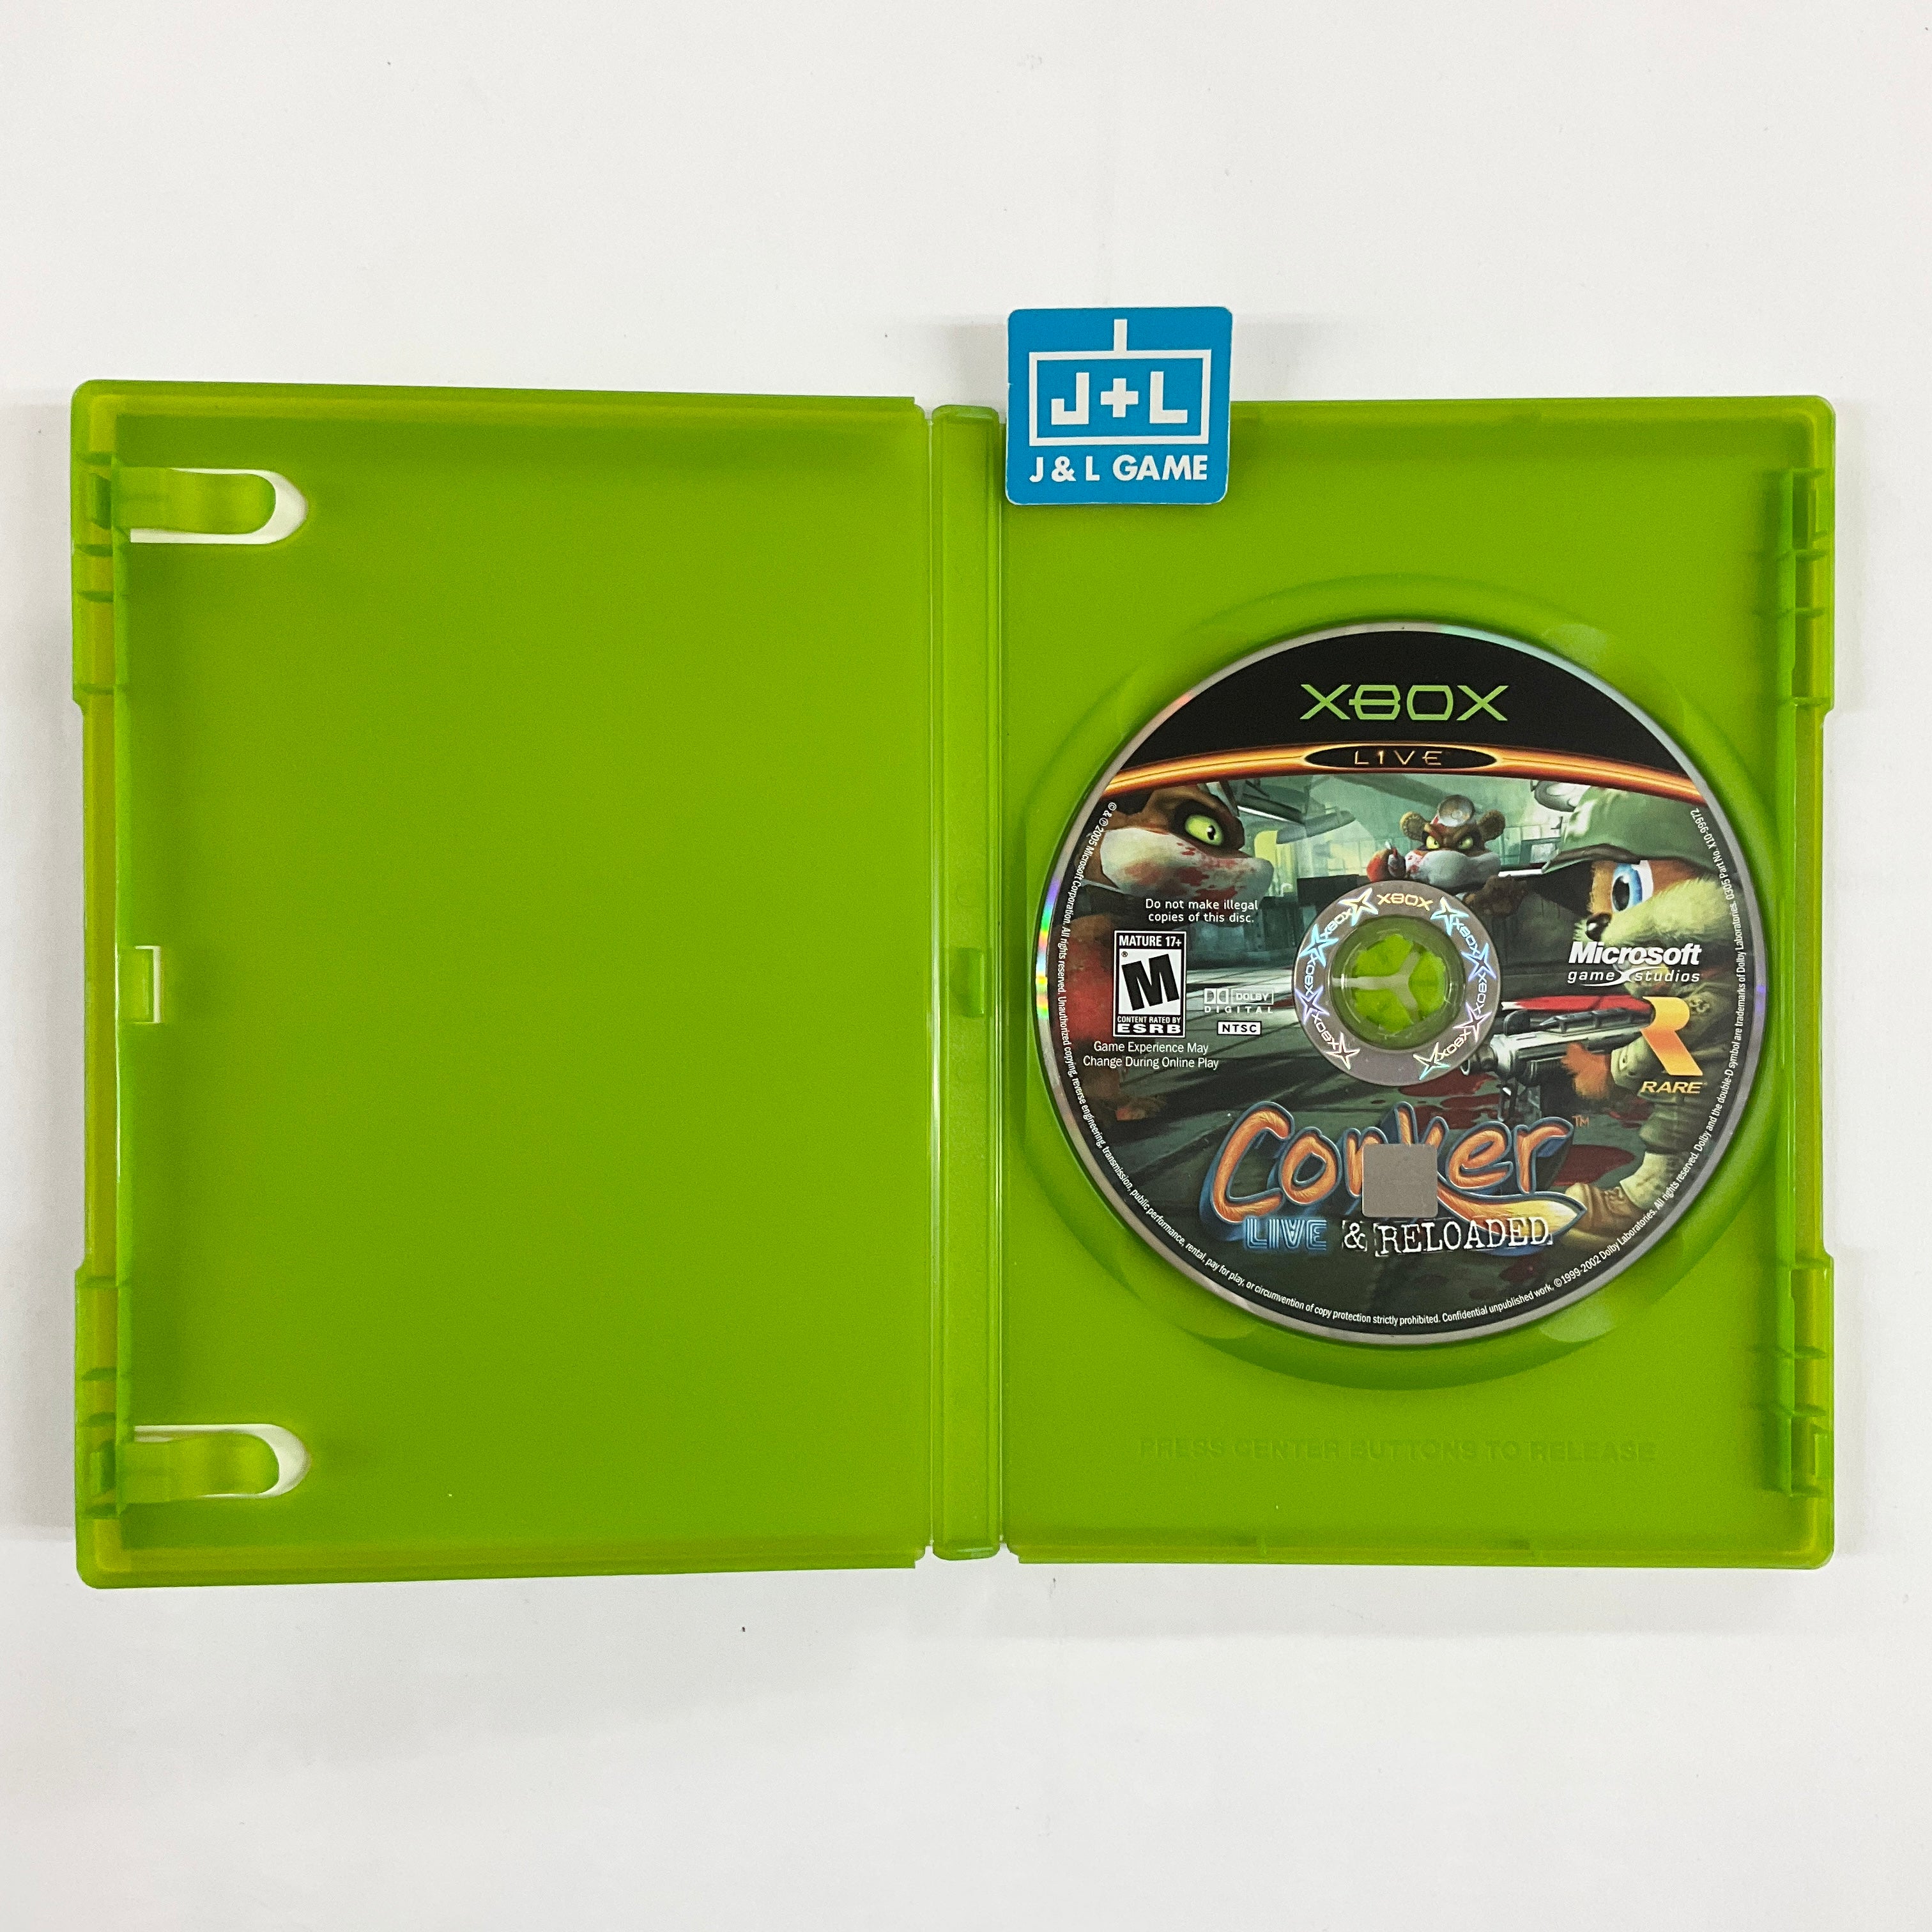 Conker: Live & Reloaded - (XB) Xbox [Pre-Owned] Video Games Microsoft Game Studios   